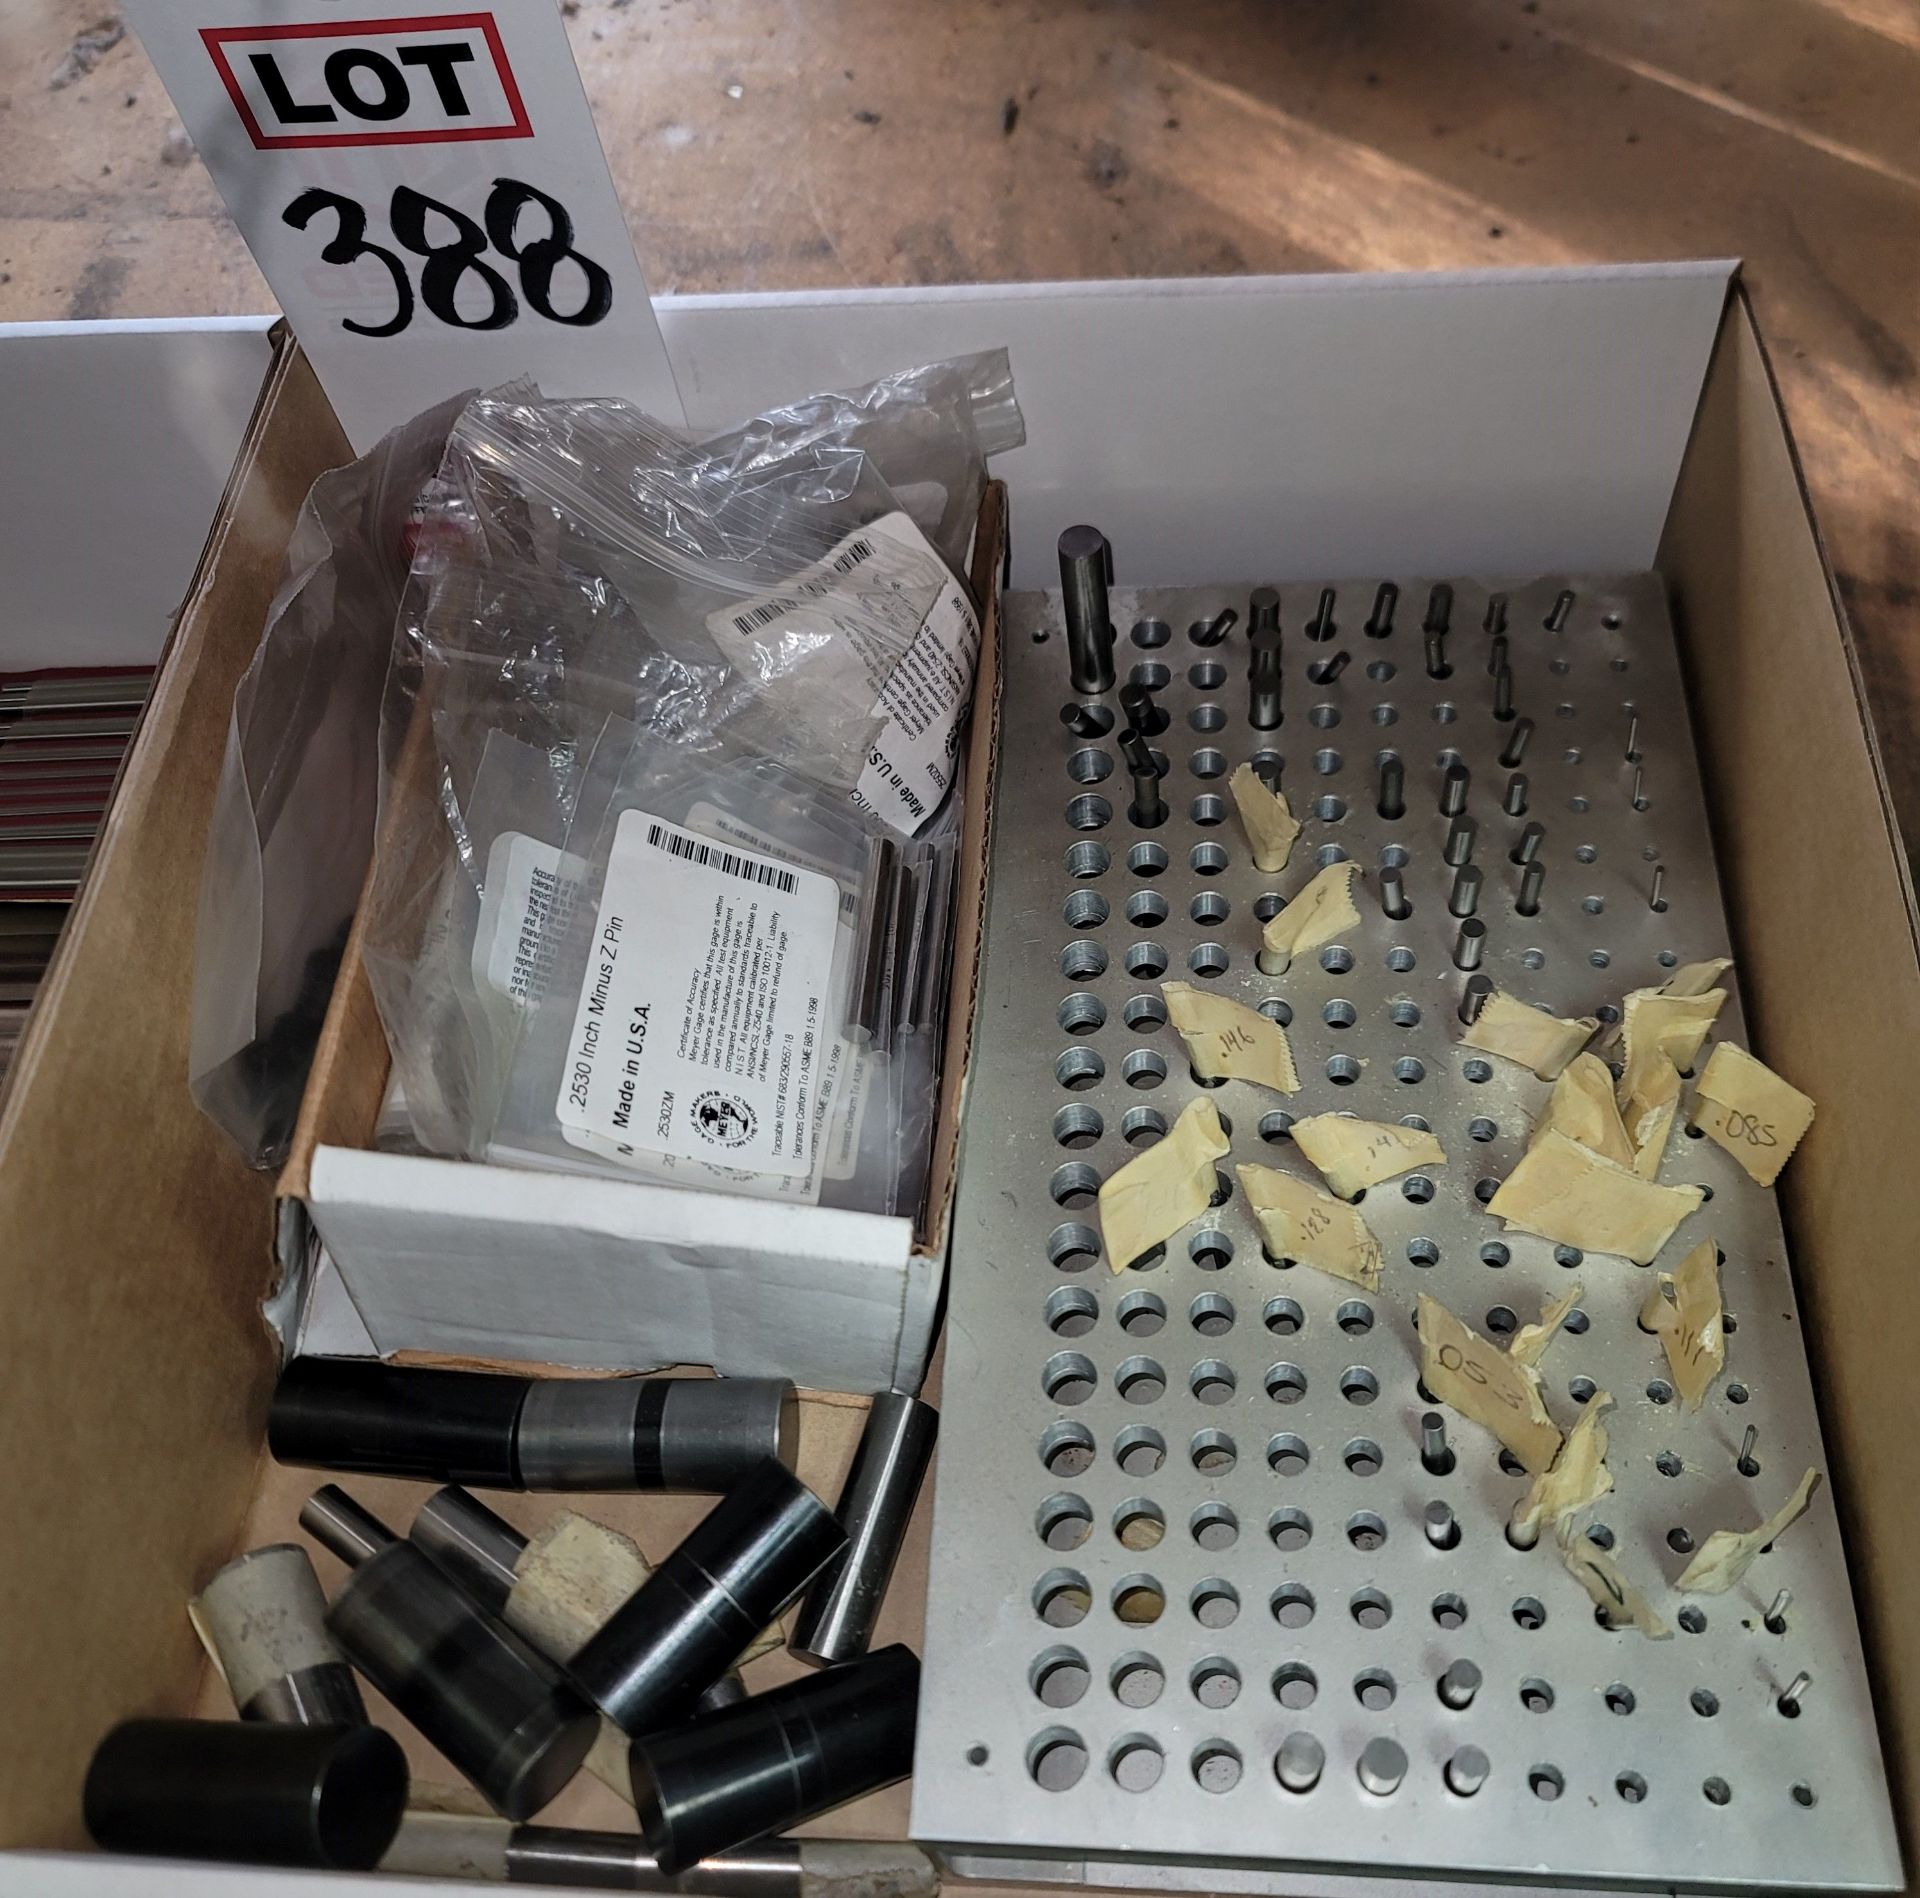 LOT - EXTRA PIN GAGES